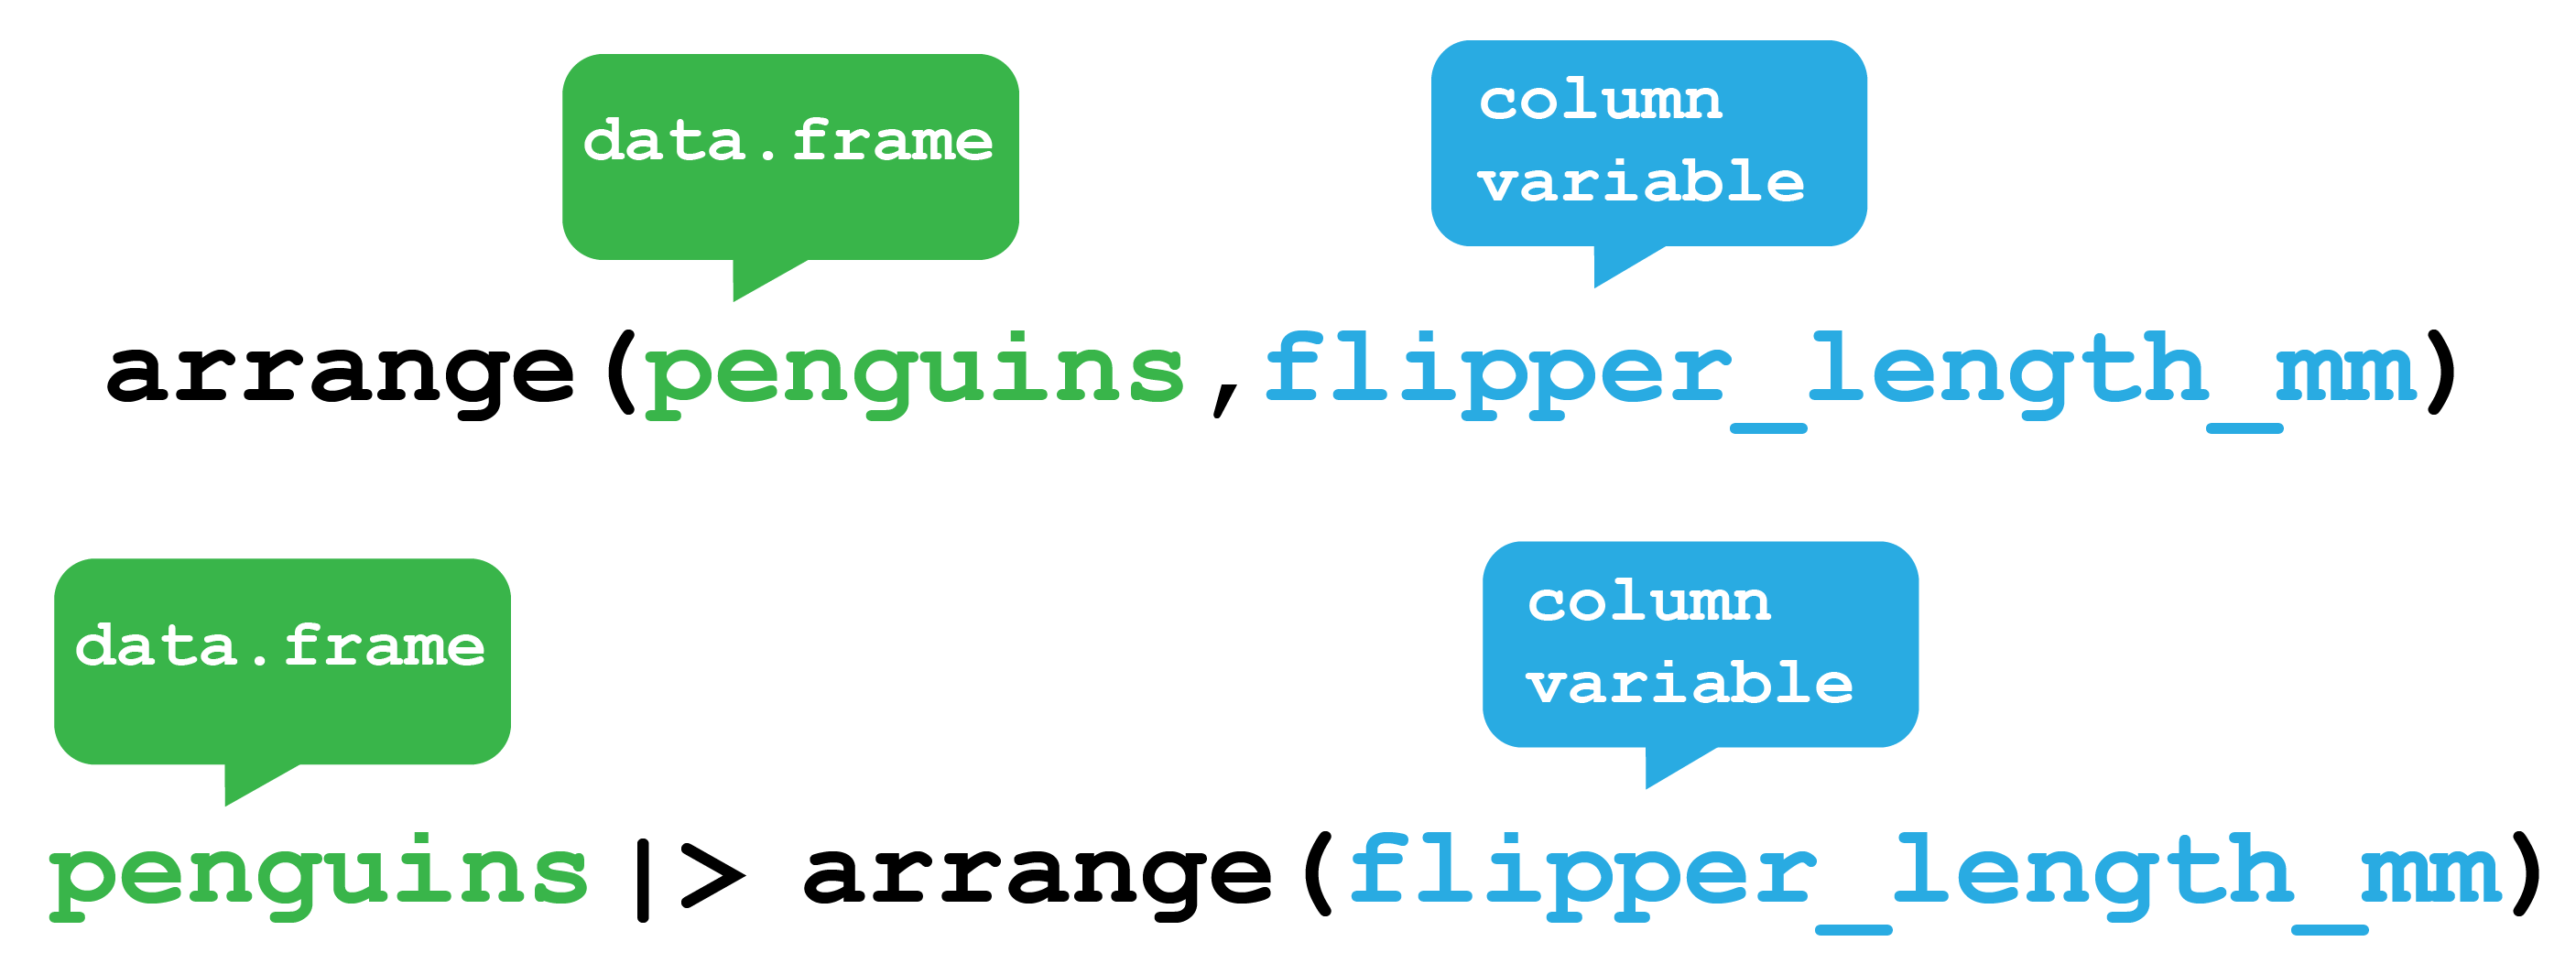 The dplyr arrange function. The arrange function orders rows from your data frame according to column variables. Here it will order the Palmer Penguins data.frame according to their flipper length. The function can either be used by providing the `penguins` dataframe as the first argument to the function or by passing the `penguins` dataframe via a pipe.